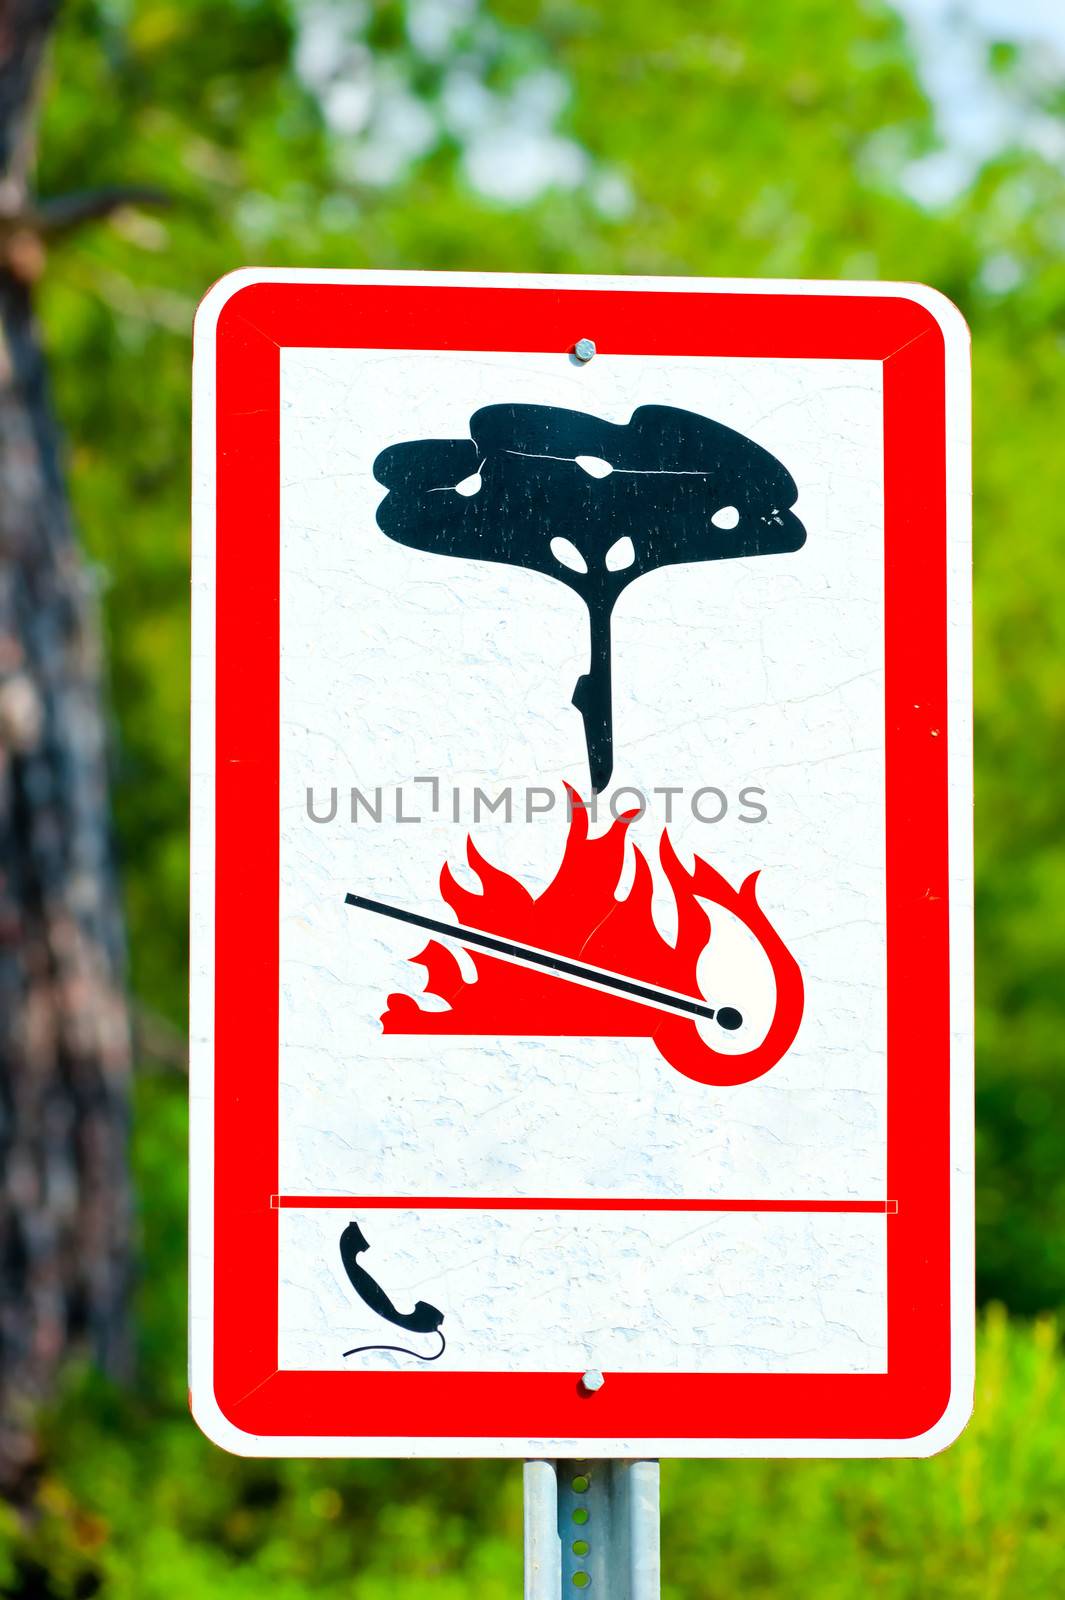 information sign in the woods on fire risk